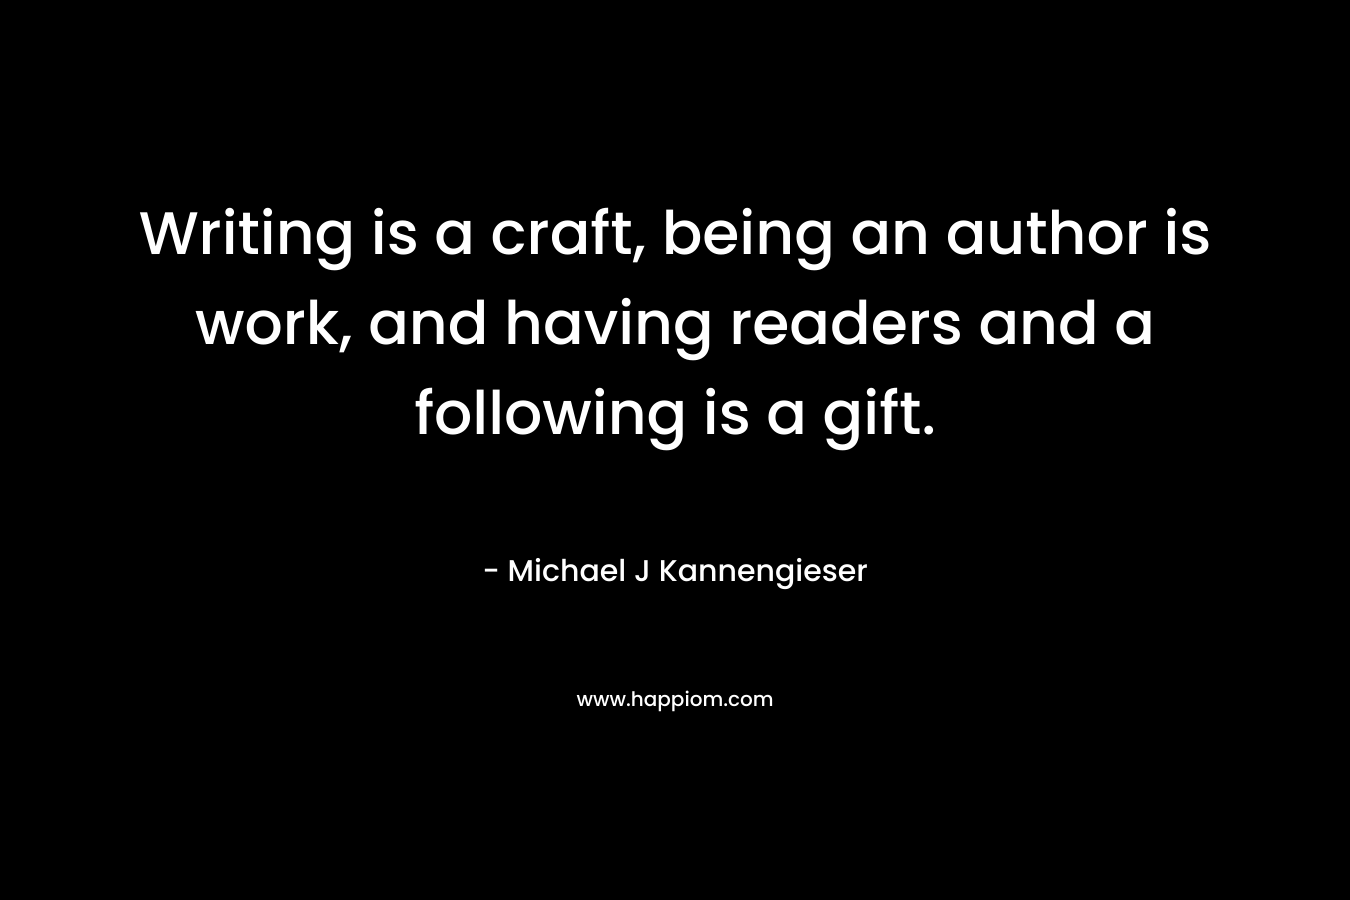 Writing is a craft, being an author is work, and having readers and a following is a gift. – Michael J Kannengieser